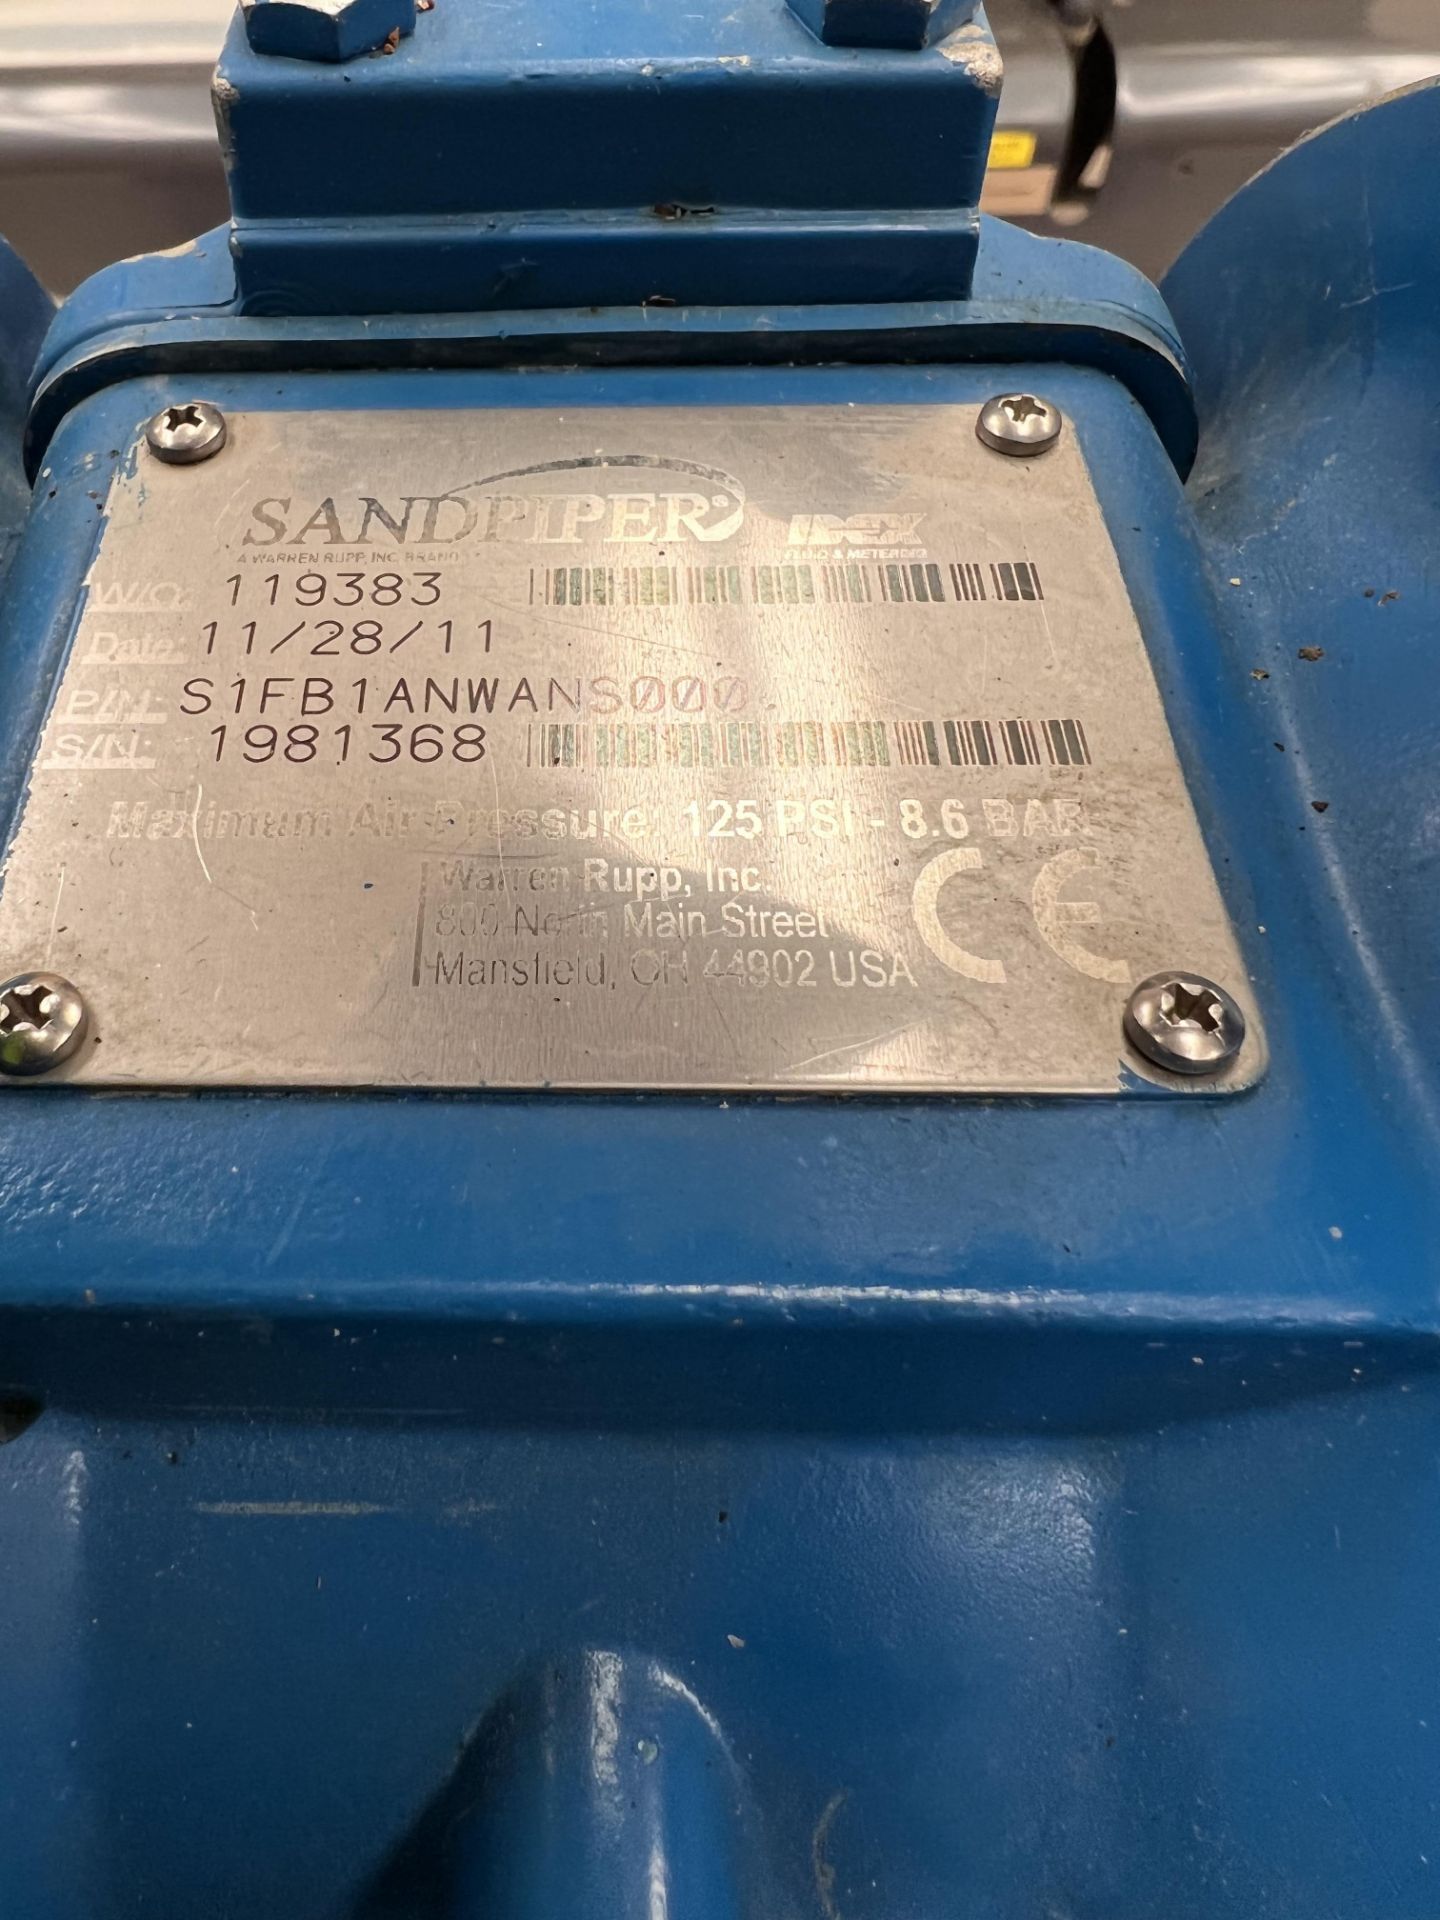 SANDPIPER 1" BELLOW DIAPHRAGM PUMP, S/N 1981368, 125 PSI, INCLUDES EGMO PNEUMATIC 2" S/S BUTTERFLY - Image 2 of 4